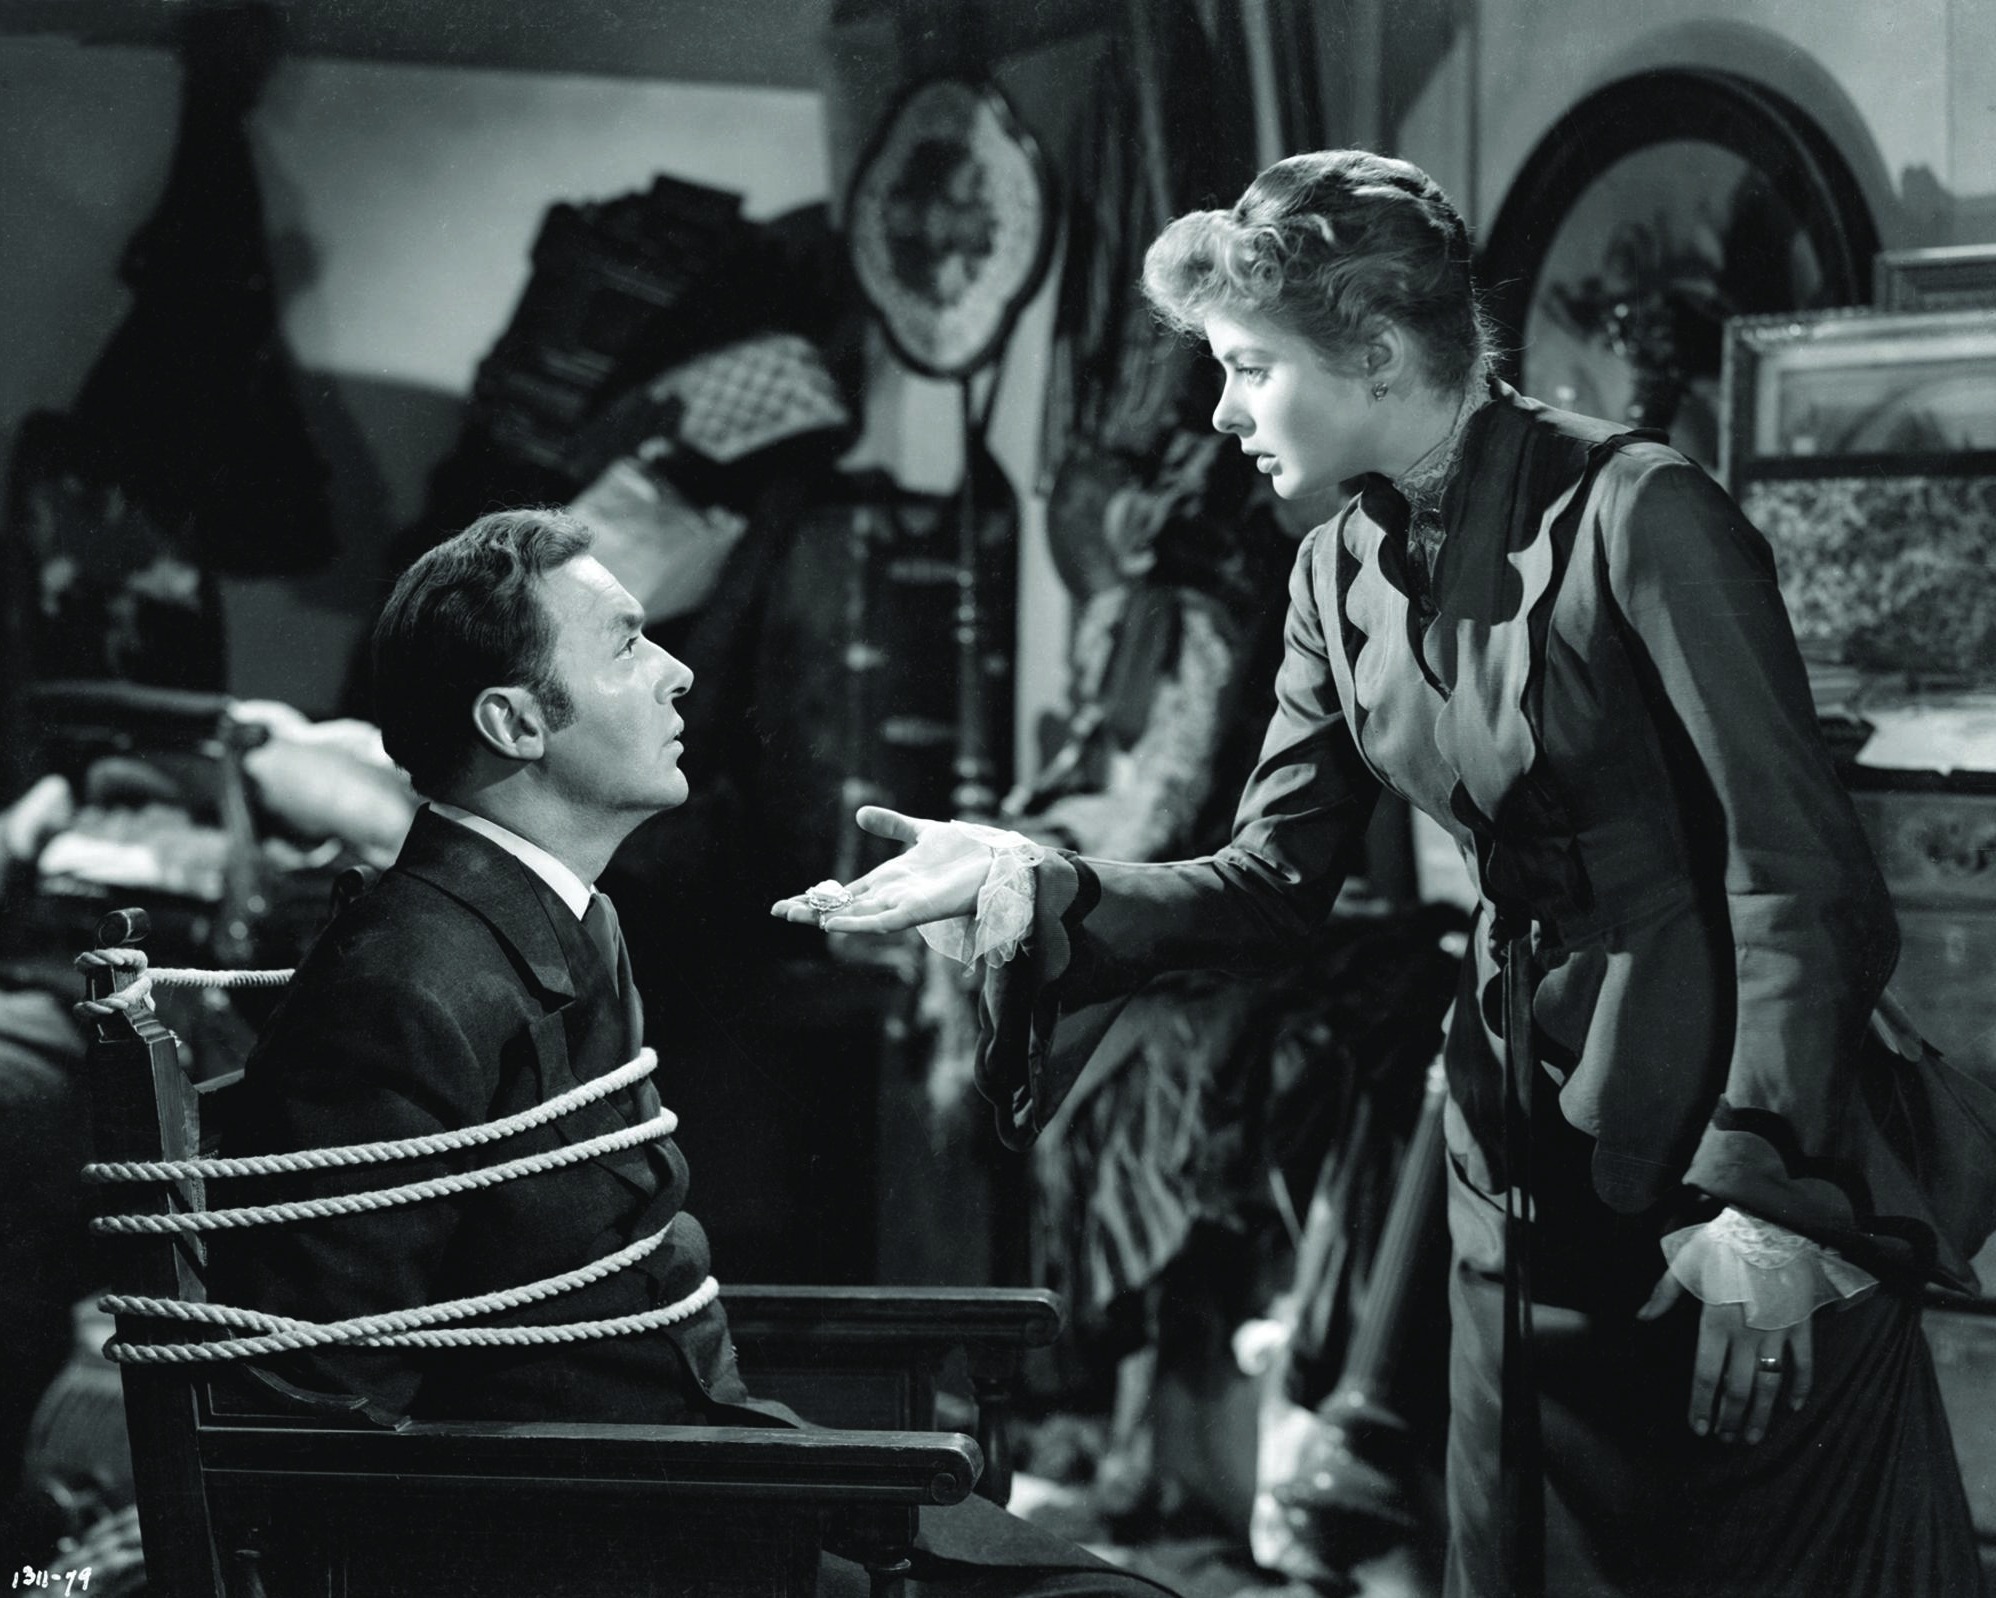 Ingrid Bergman confronts Charles Boyer, tied up in a chair